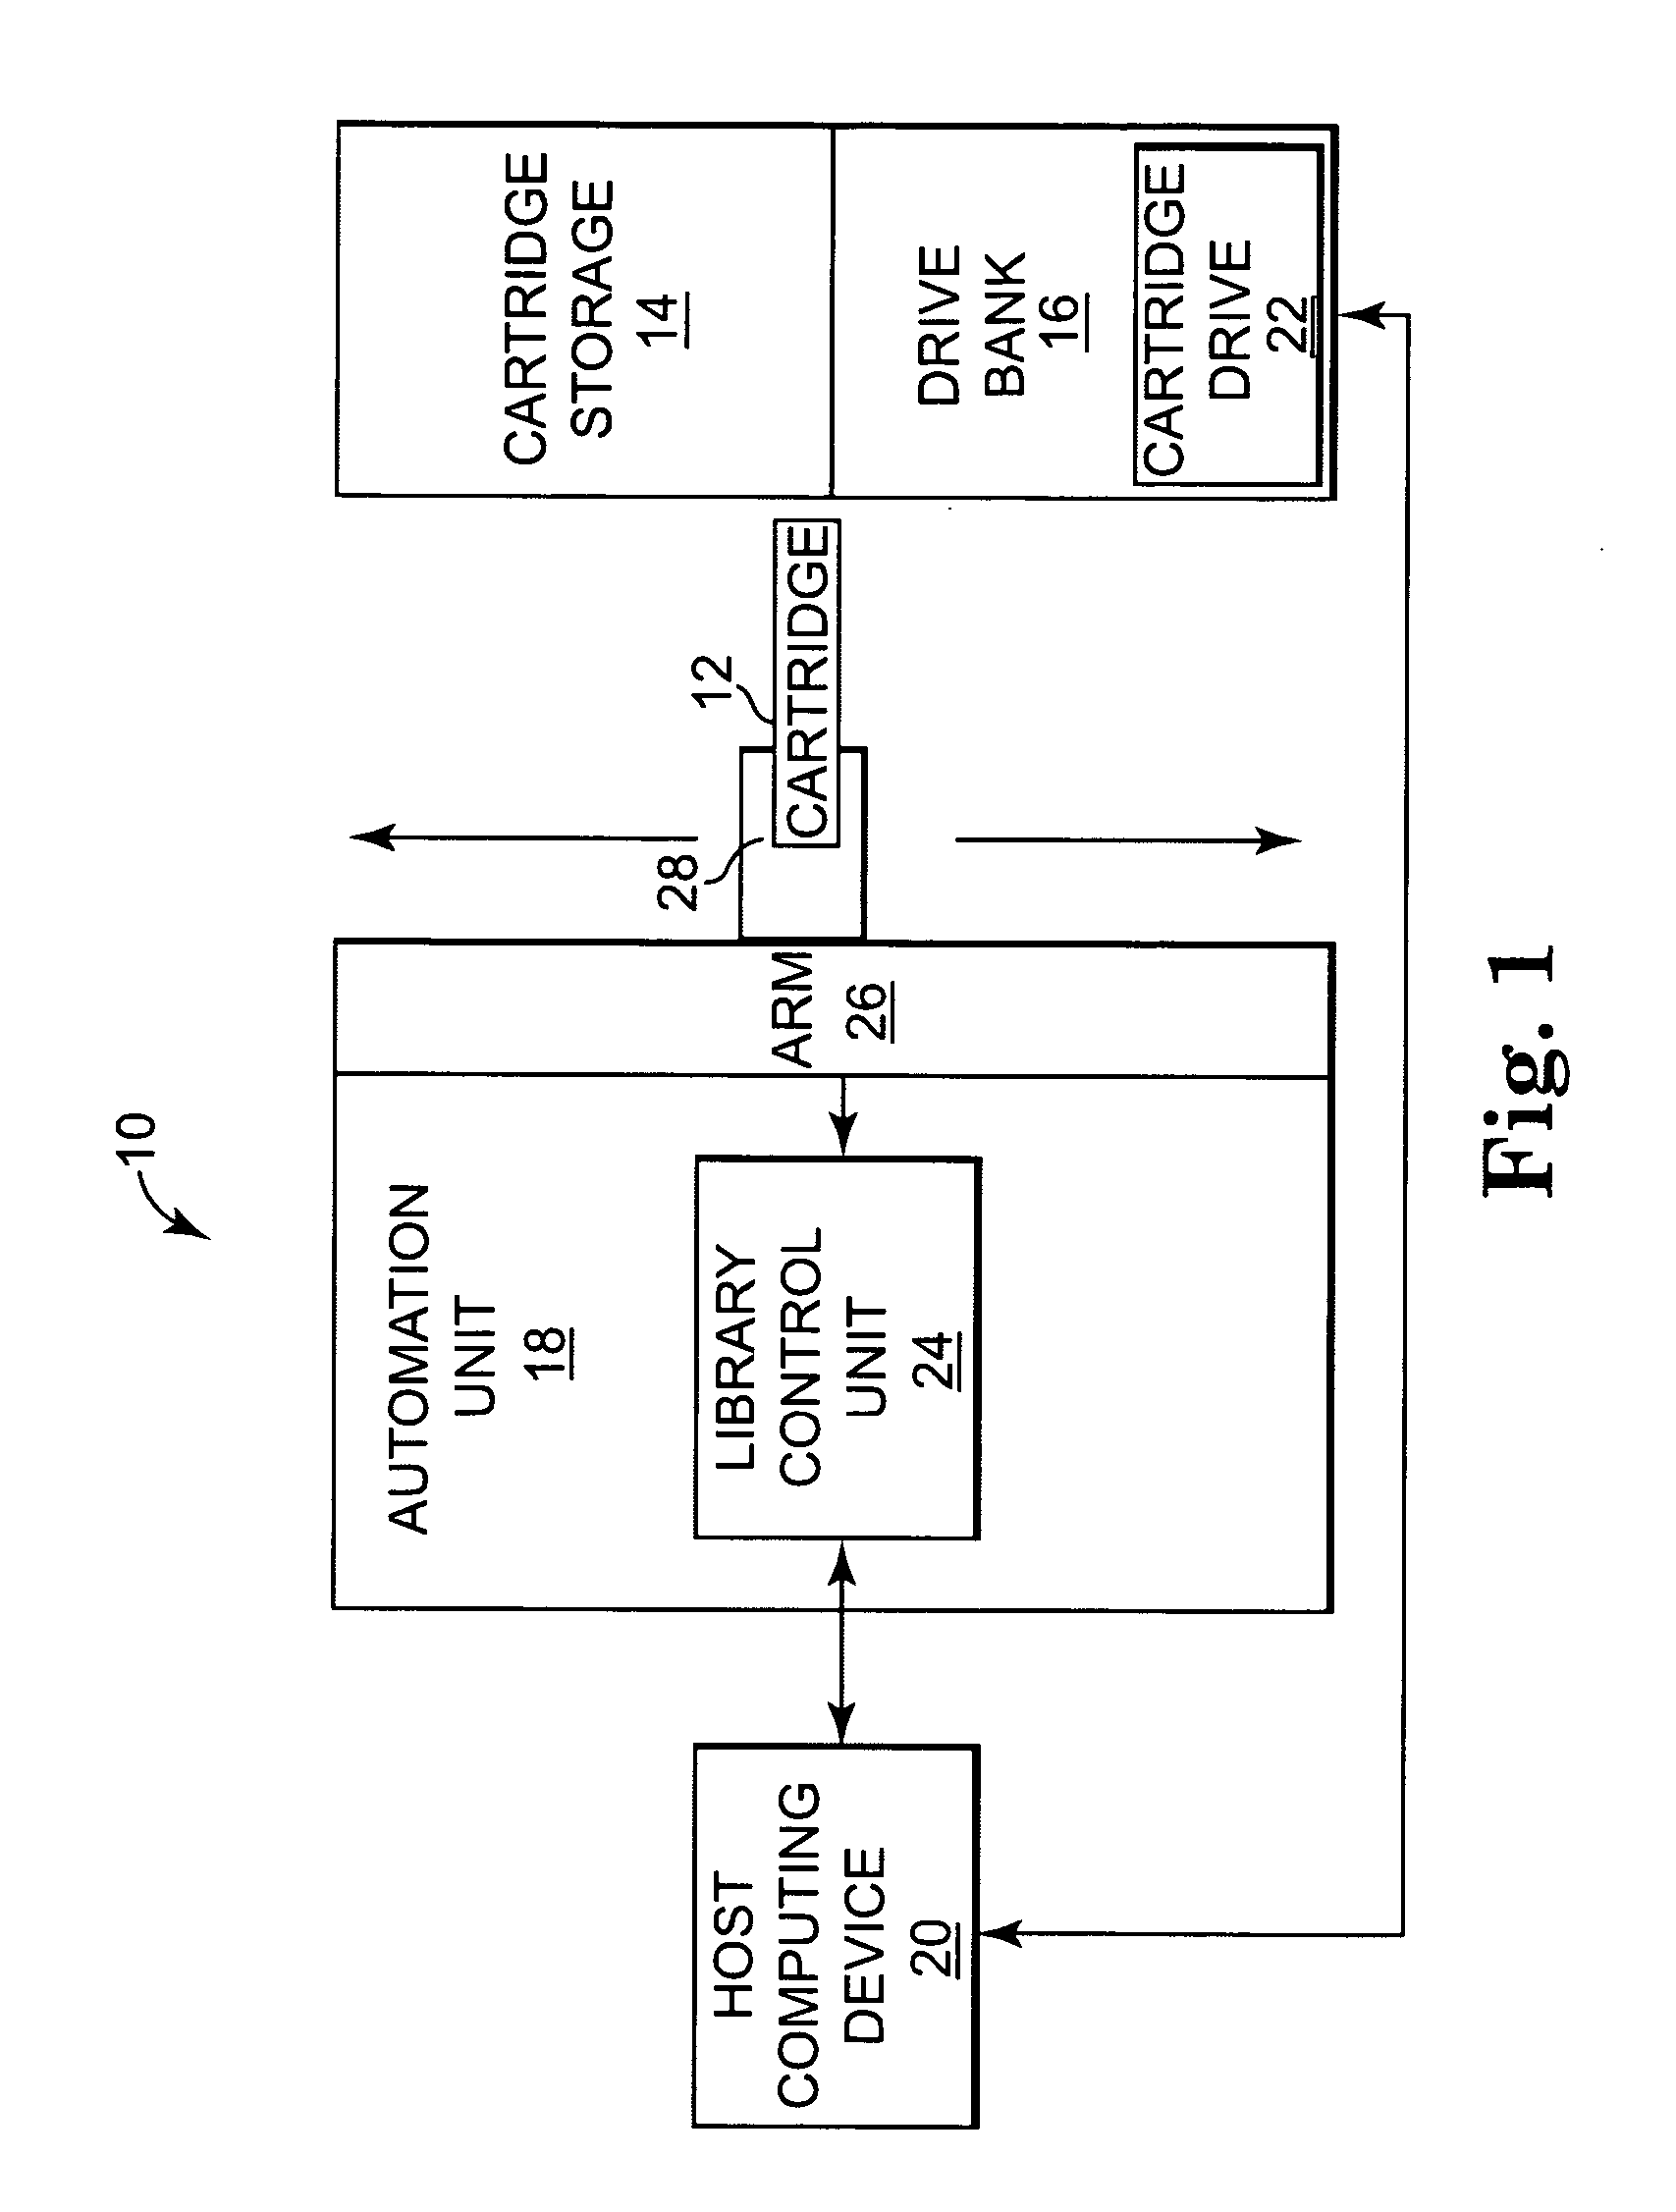 Electronic data connector of data storage cartridge and associated cartridge drive